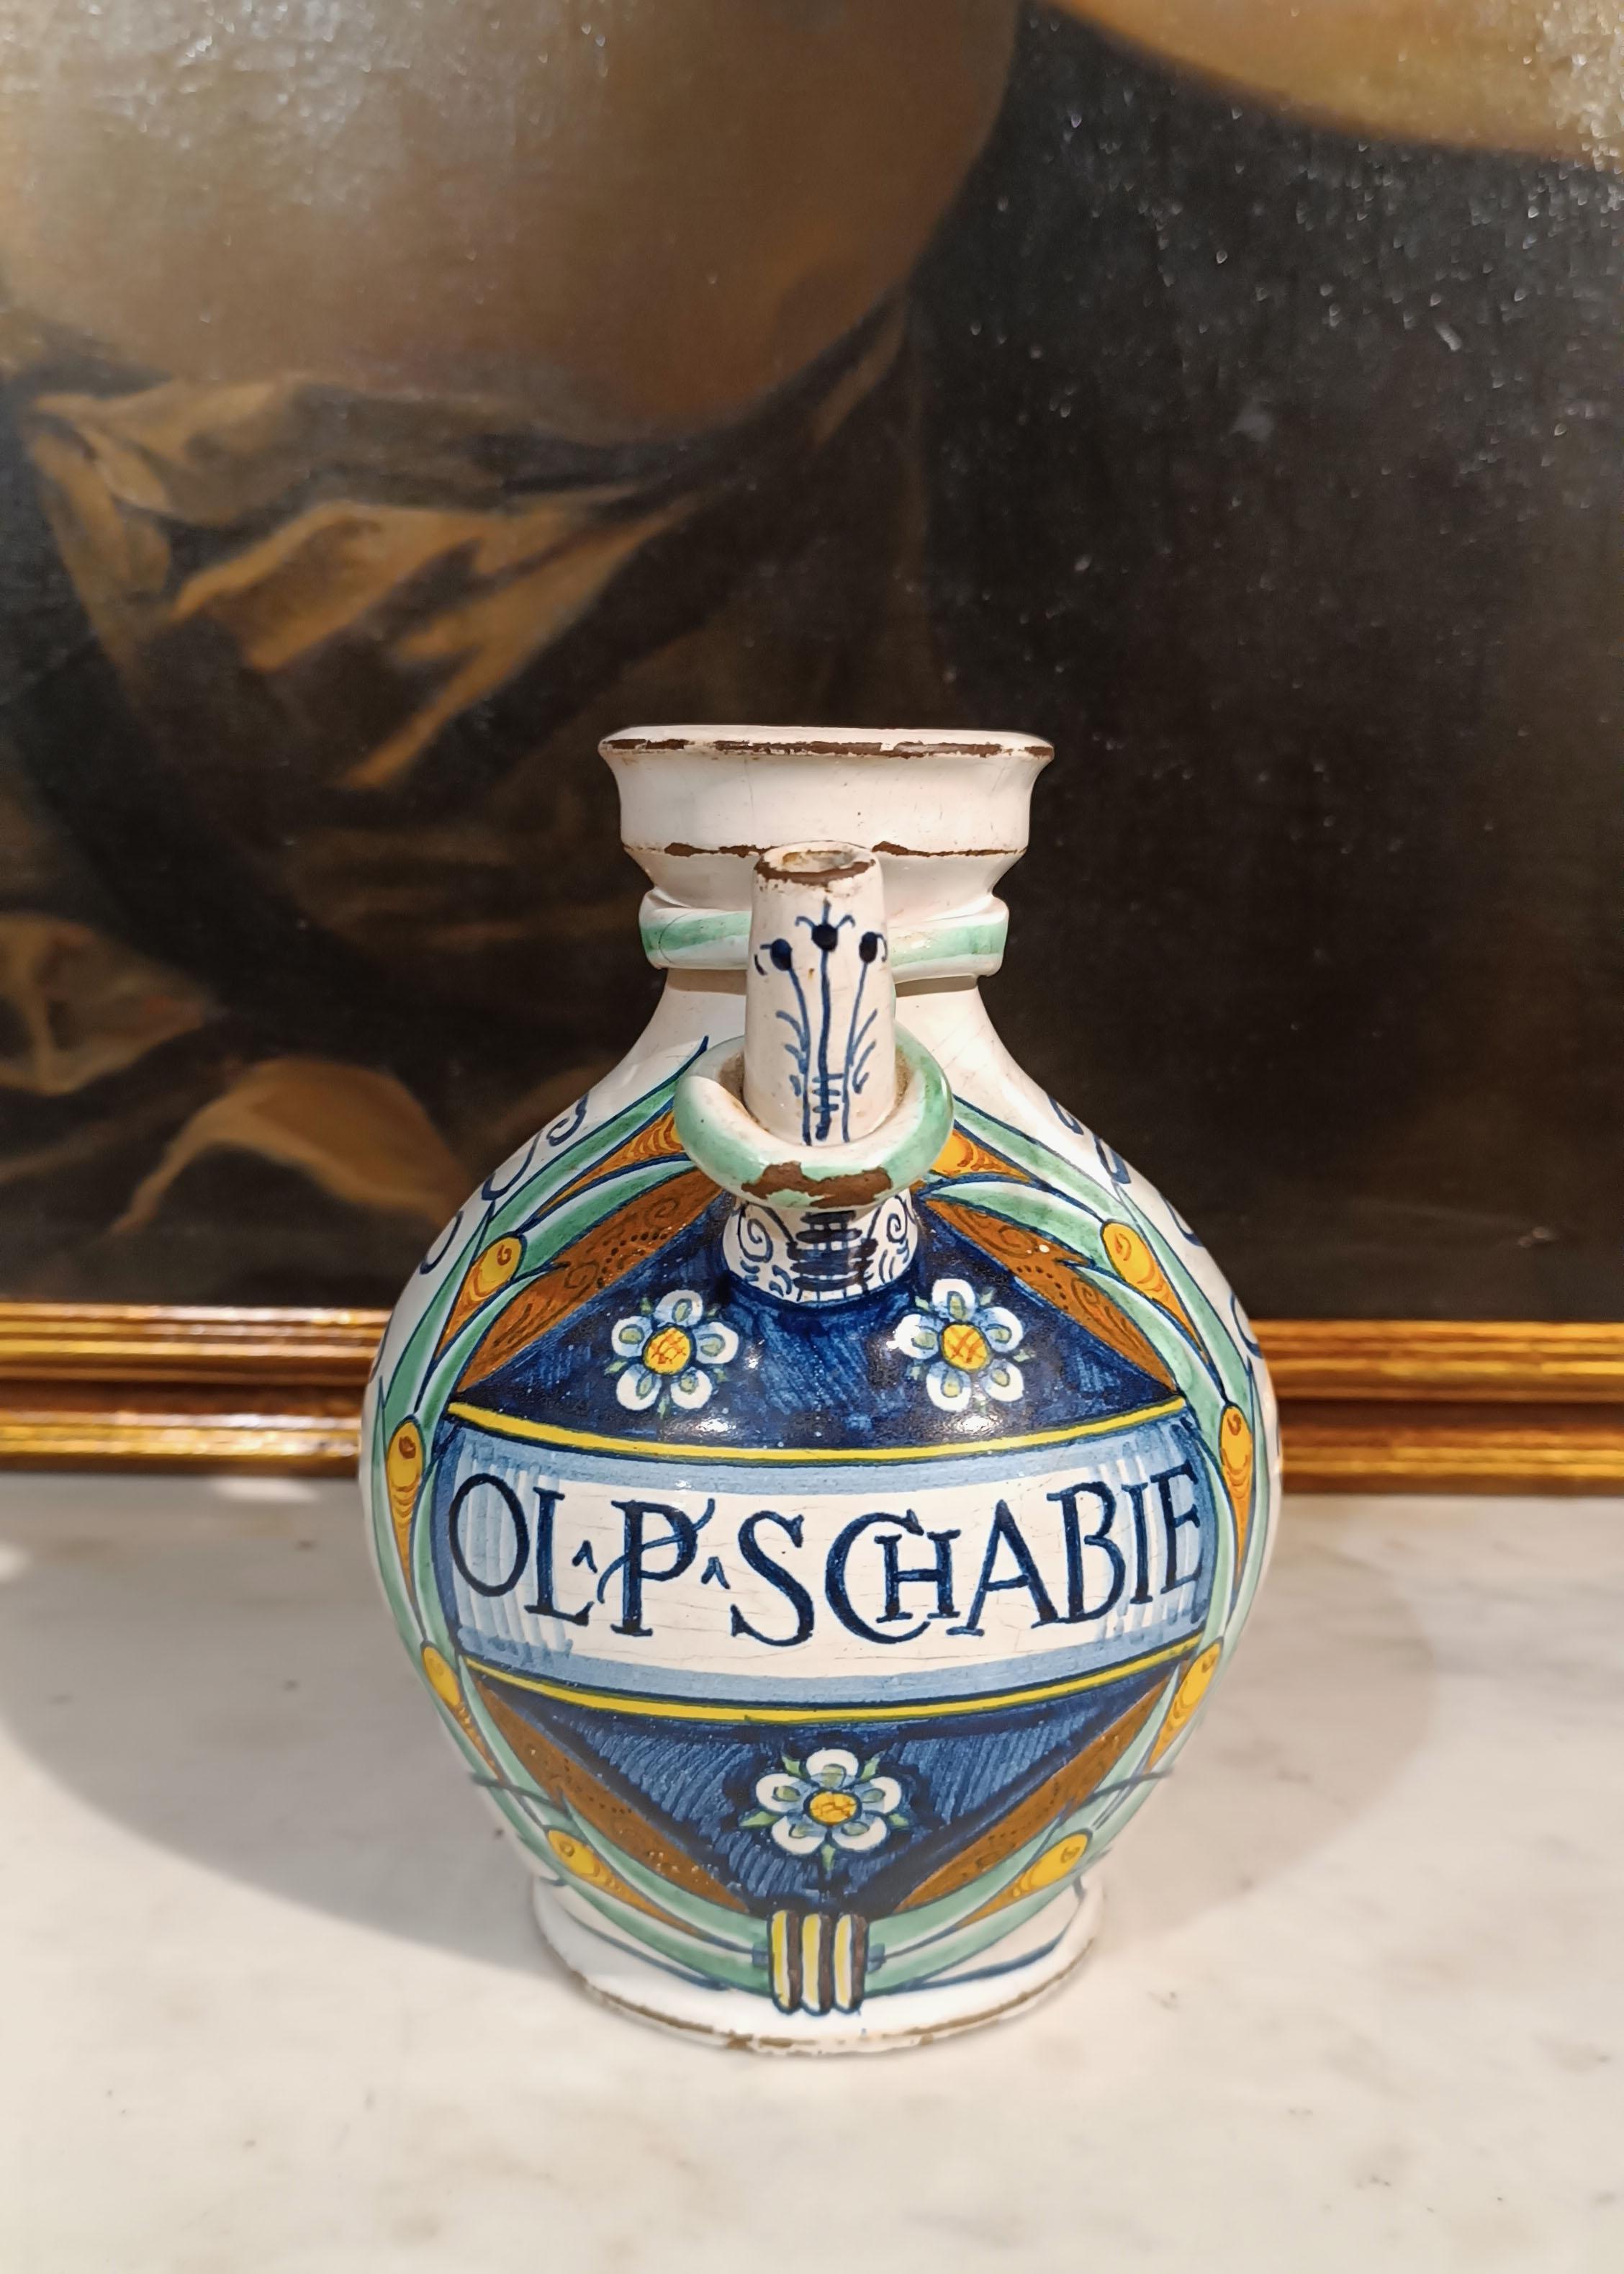 This polychrome glazed majolica pharmacy jug represents a precious example of 18th century Faenza craftsmanship. Its combination of bright colors and its richly detailed decoration make this jug one of a kind. The use of cobalt blue, green and